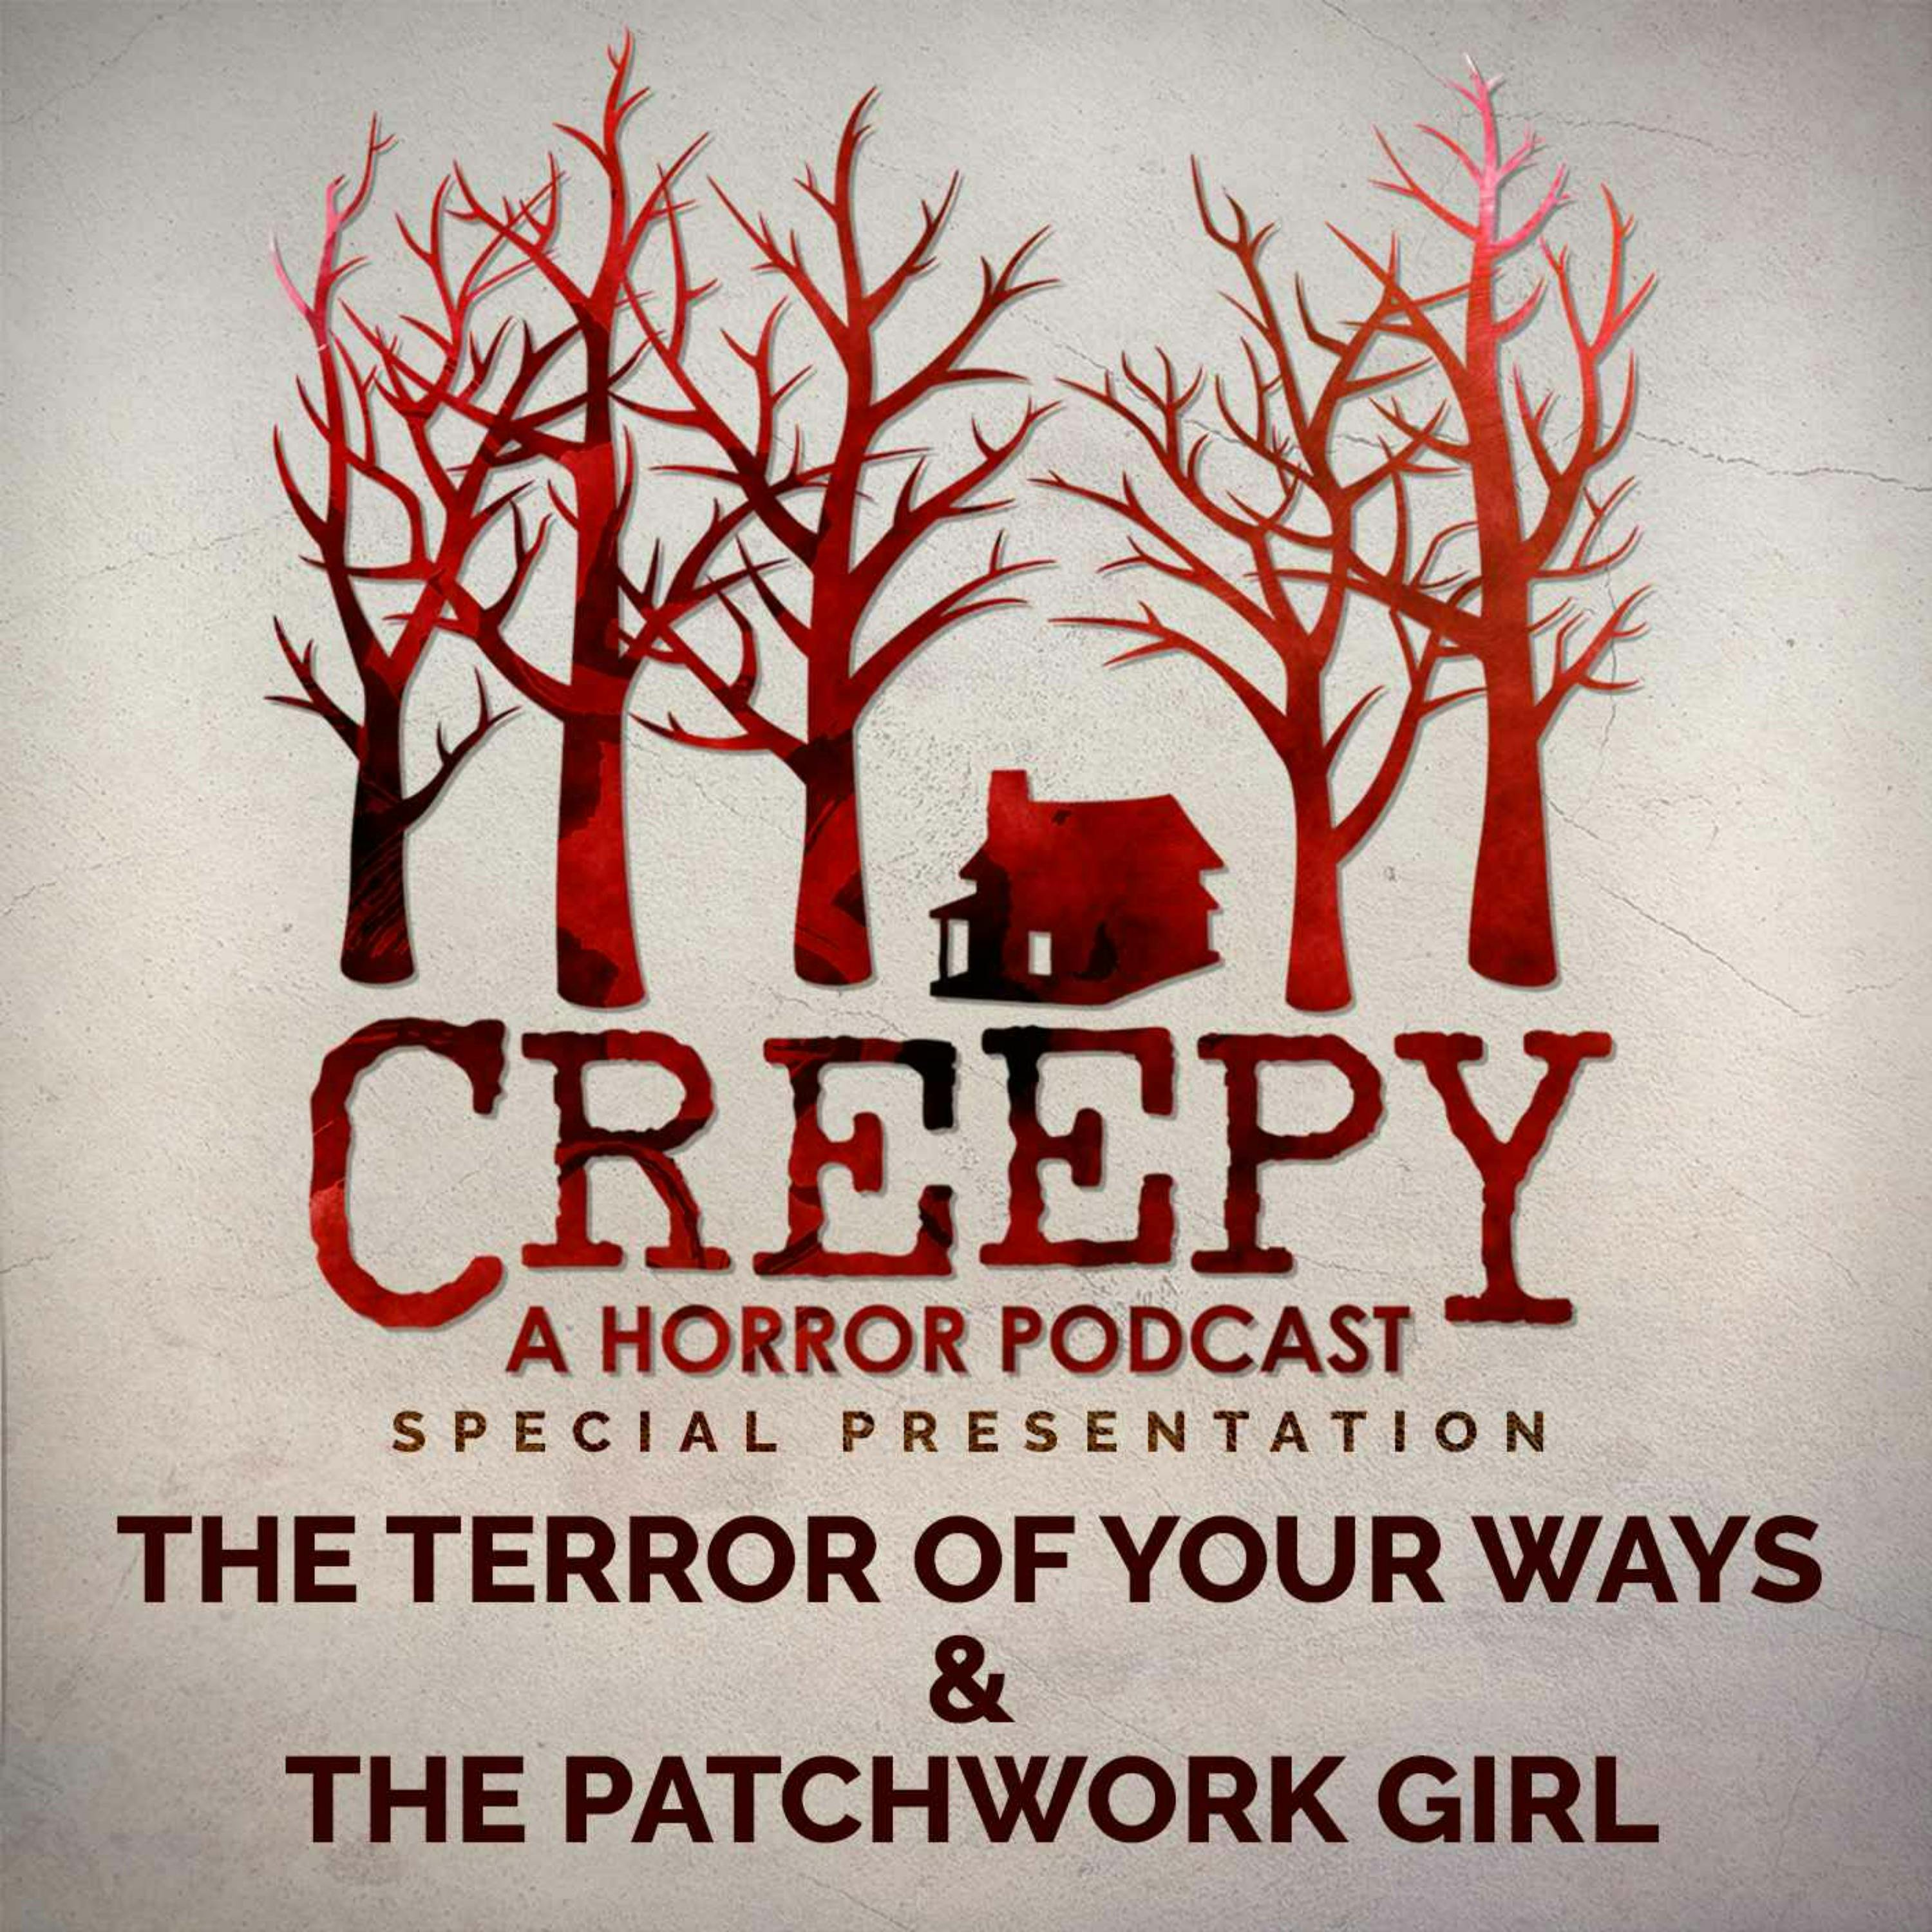 The Terror of Your Ways &The Patchwork Girl